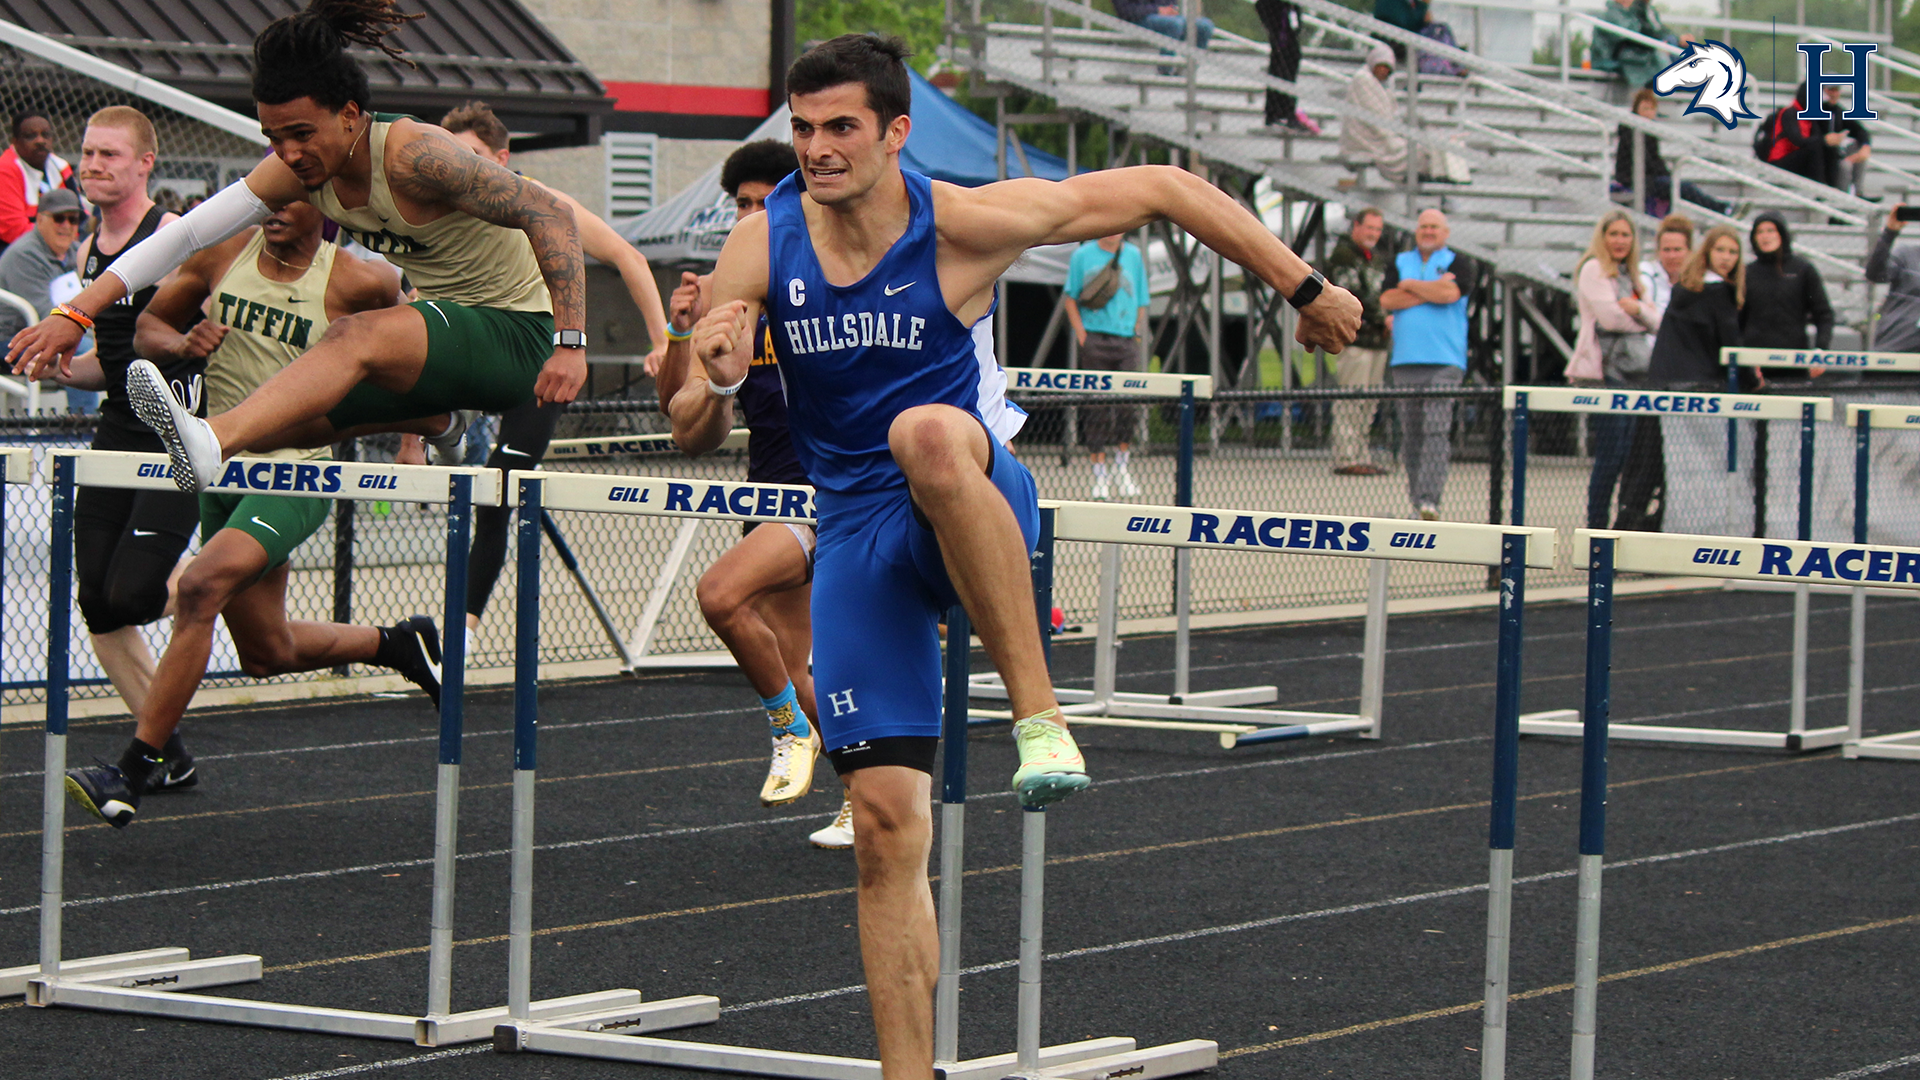 Charger men take third at G-MAC Outdoor Championships in best performance in two decades